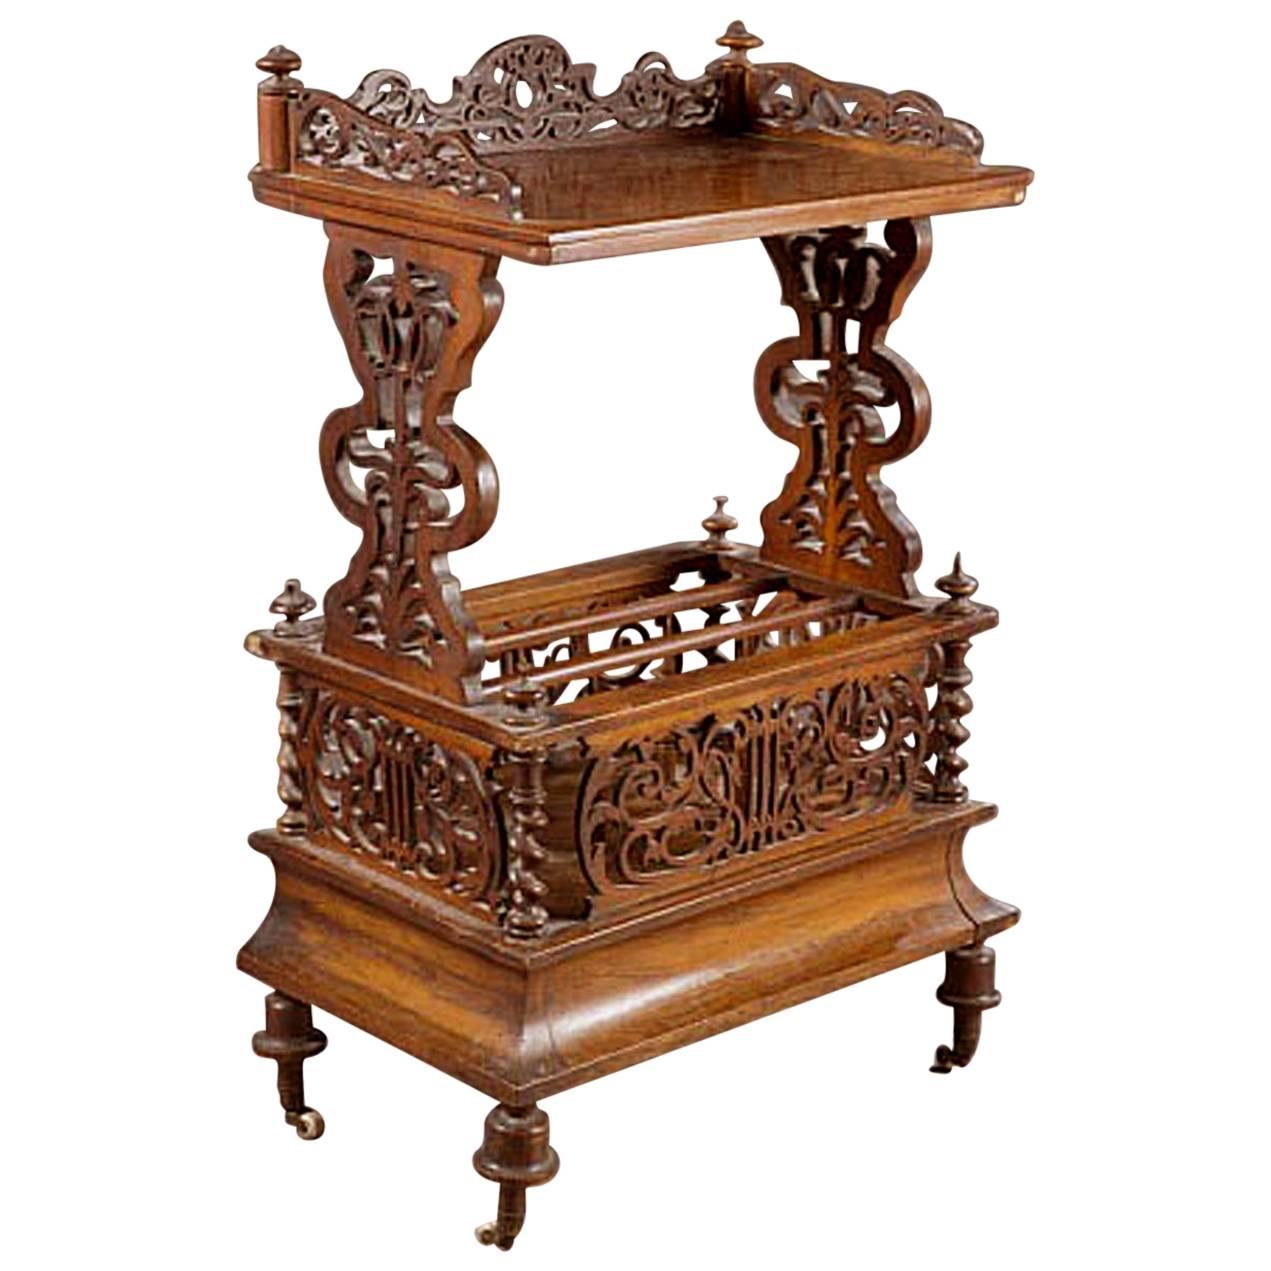 English Canterbury or Magazine stand in Burled Walnut, Mid-19th Century For Sale